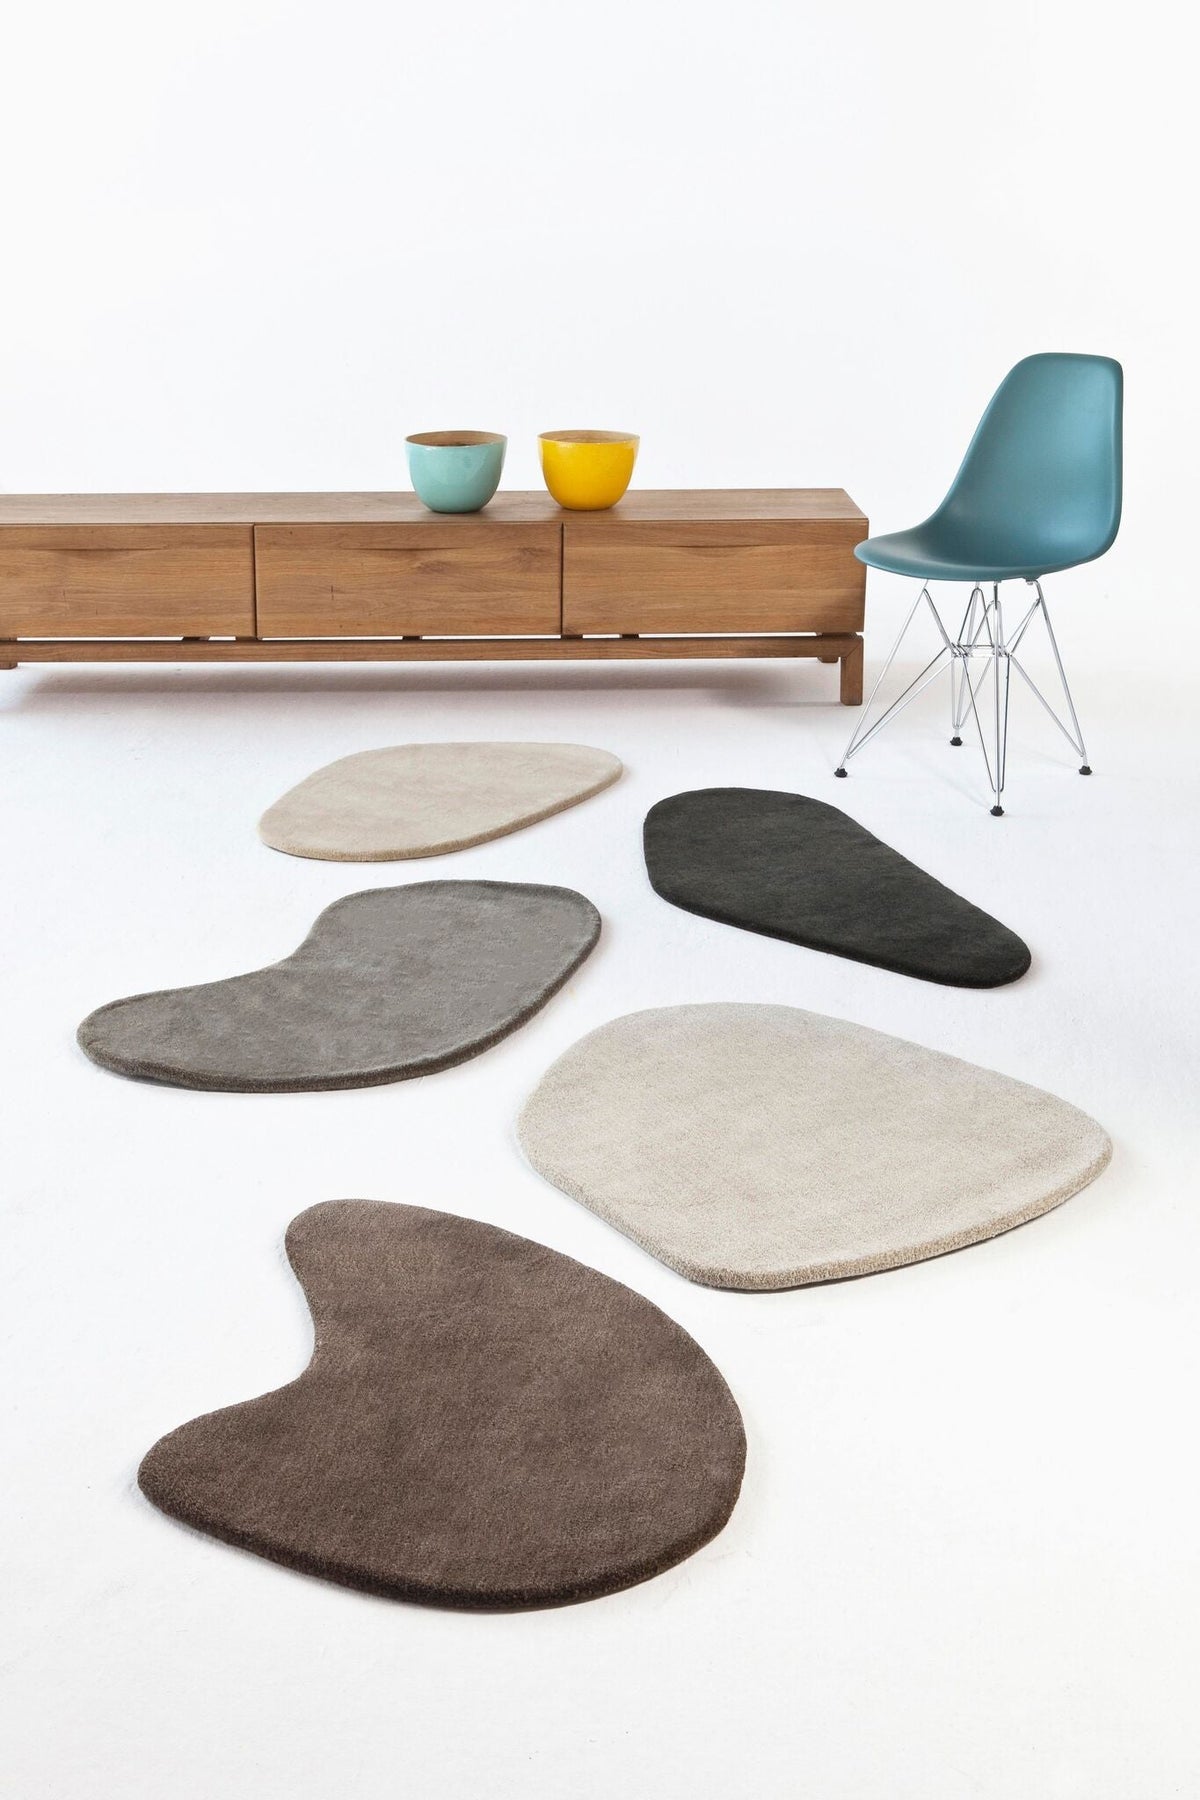 Stone-wool Little Stone 8 Rug-Nanimarquina-Contract Furniture Store